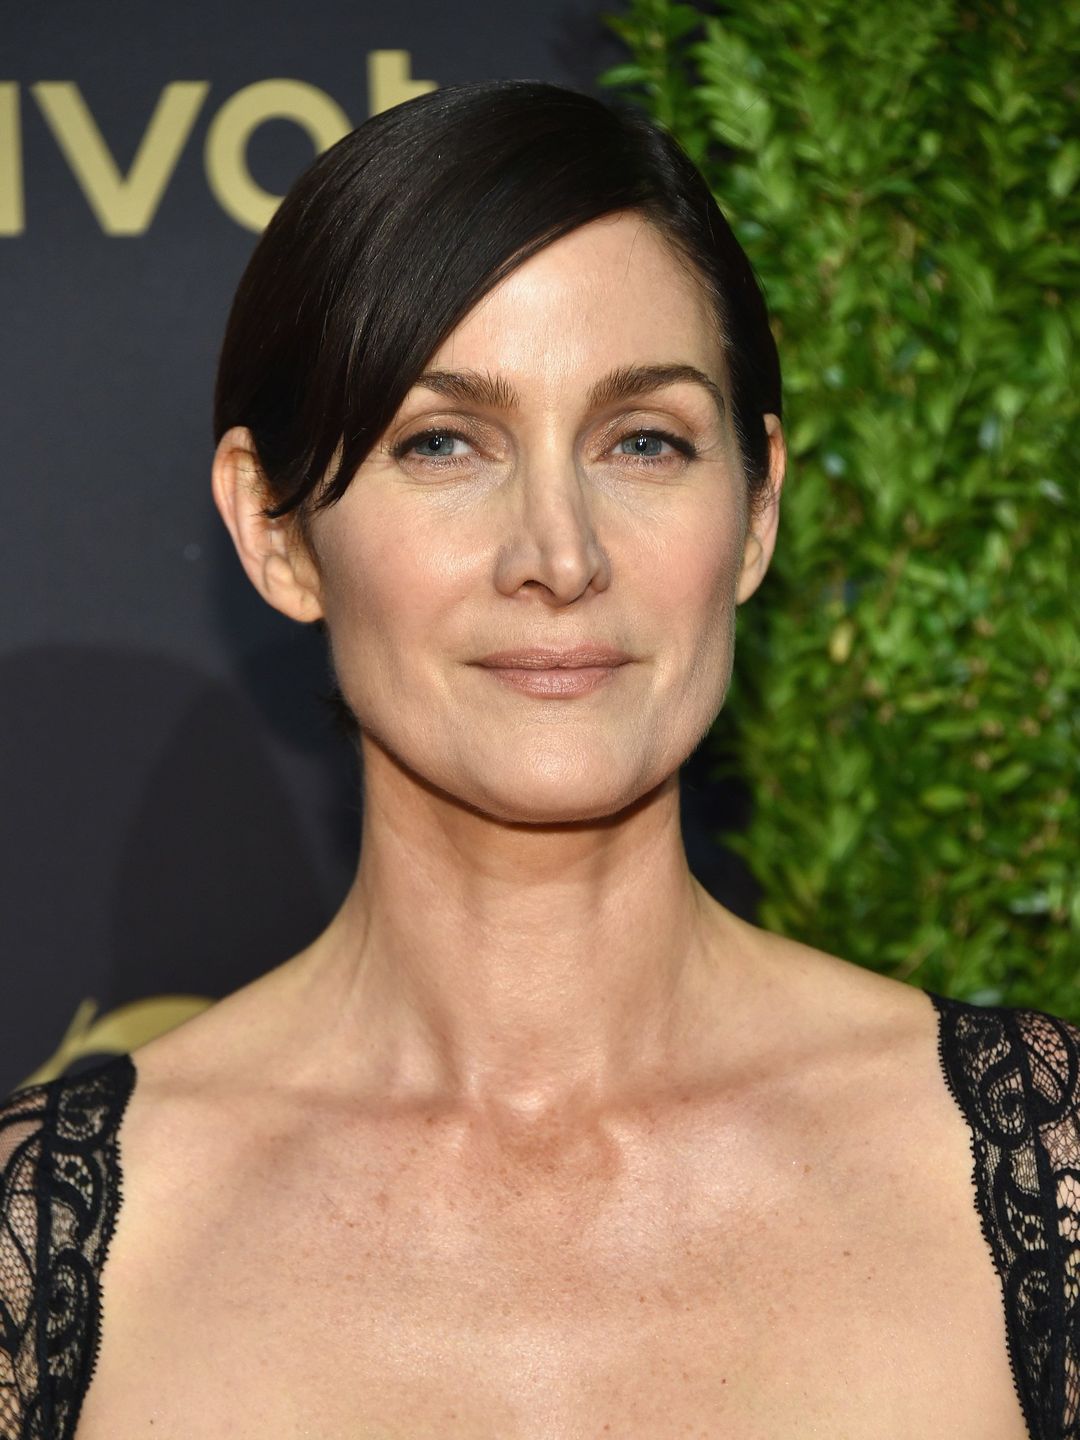 Carrie-Anne Moss where does she live